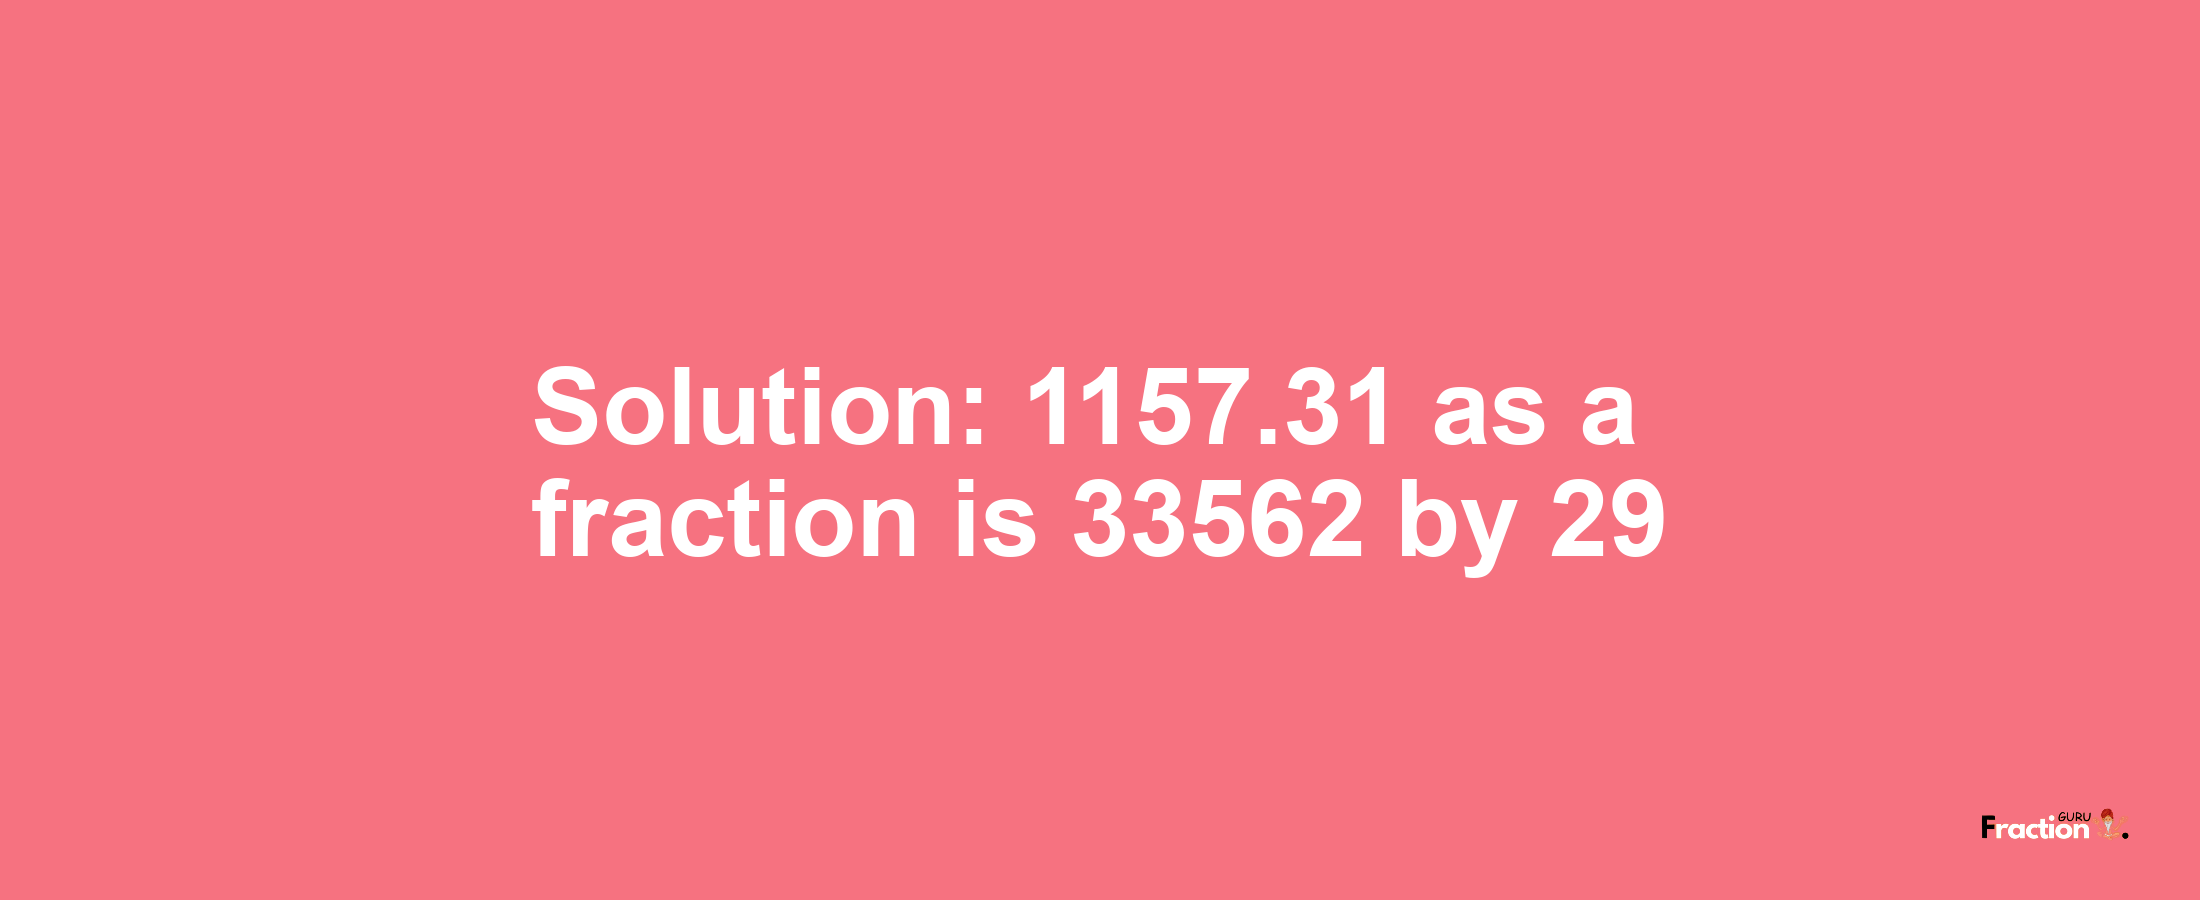 Solution:1157.31 as a fraction is 33562/29